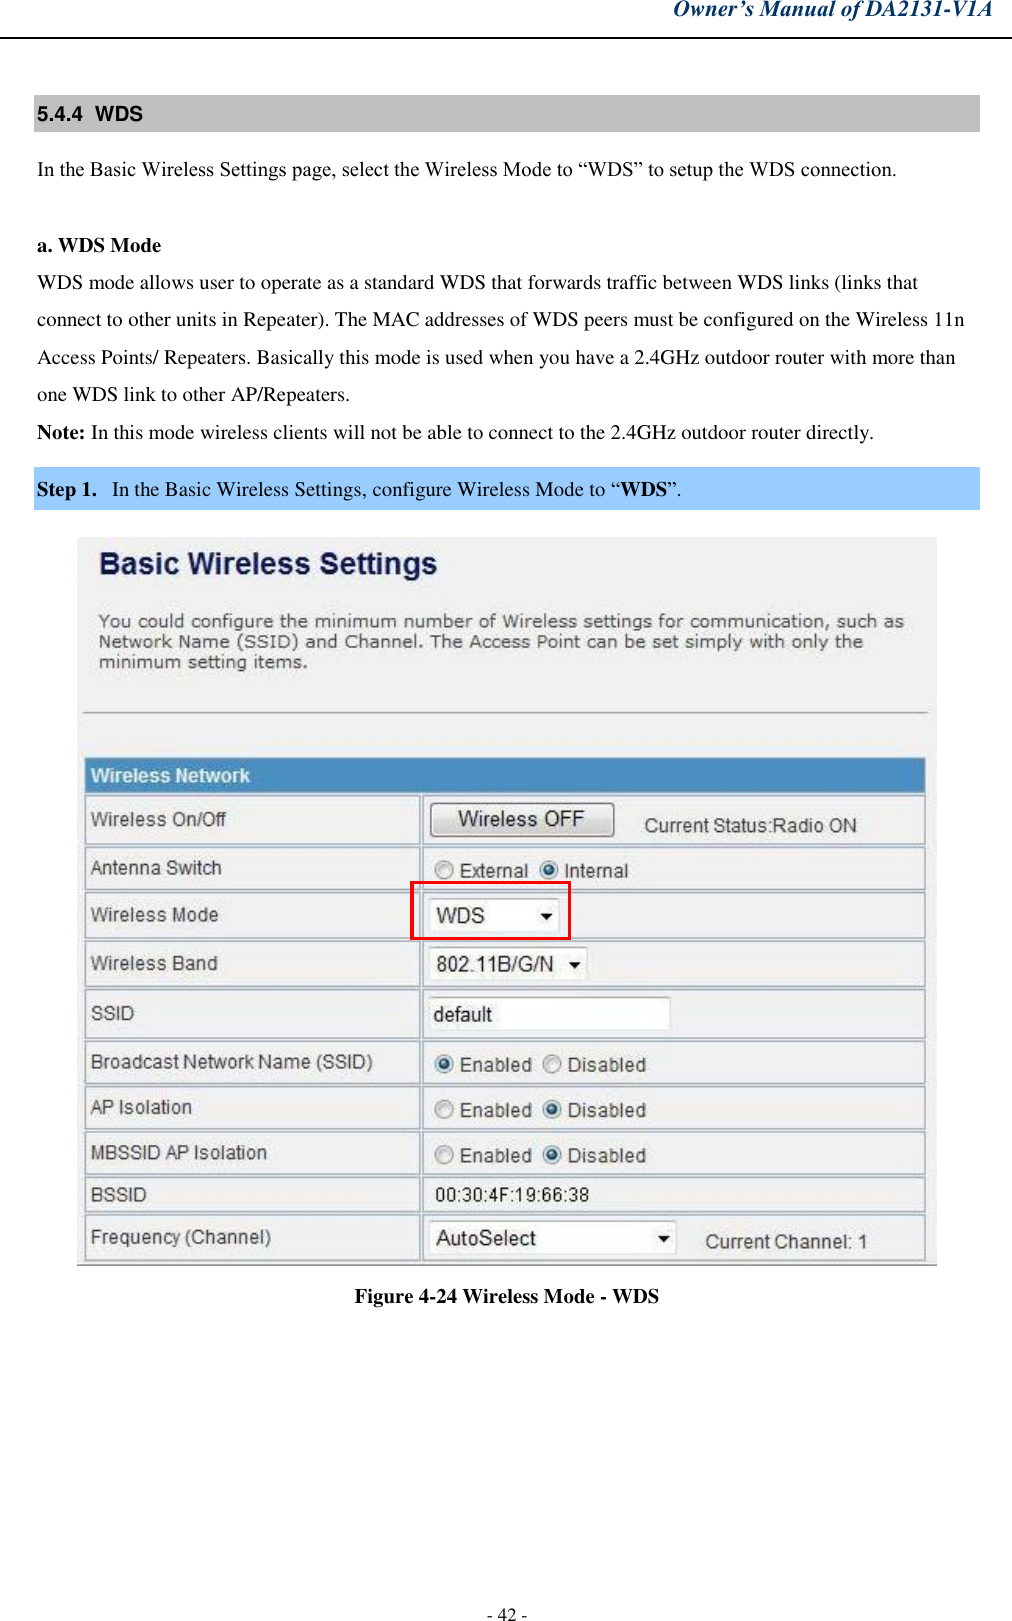 Owner’s Manual of DA2131-V1A - 42 - 5.4.4  WDS  In the Basic Wireless Settings page, select the Wireless Mode to “WDS” to setup the WDS connection. a. WDS ModeWDS mode allows user to operate as a standard WDS that forwards traffic between WDS links (links that connect to other units in Repeater). The MAC addresses of WDS peers must be configured on the Wireless 11n Access Points/ Repeaters. Basically this mode is used when you have a 2.4GHz outdoor router with more than one WDS link to other AP/Repeaters.  Note: In this mode wireless clients will not be able to connect to the 2.4GHz outdoor router directly. Step 1. In the Basic Wireless Settings, configure Wireless Mode to “WDS”. Figure 4-24 Wireless Mode - WDS 